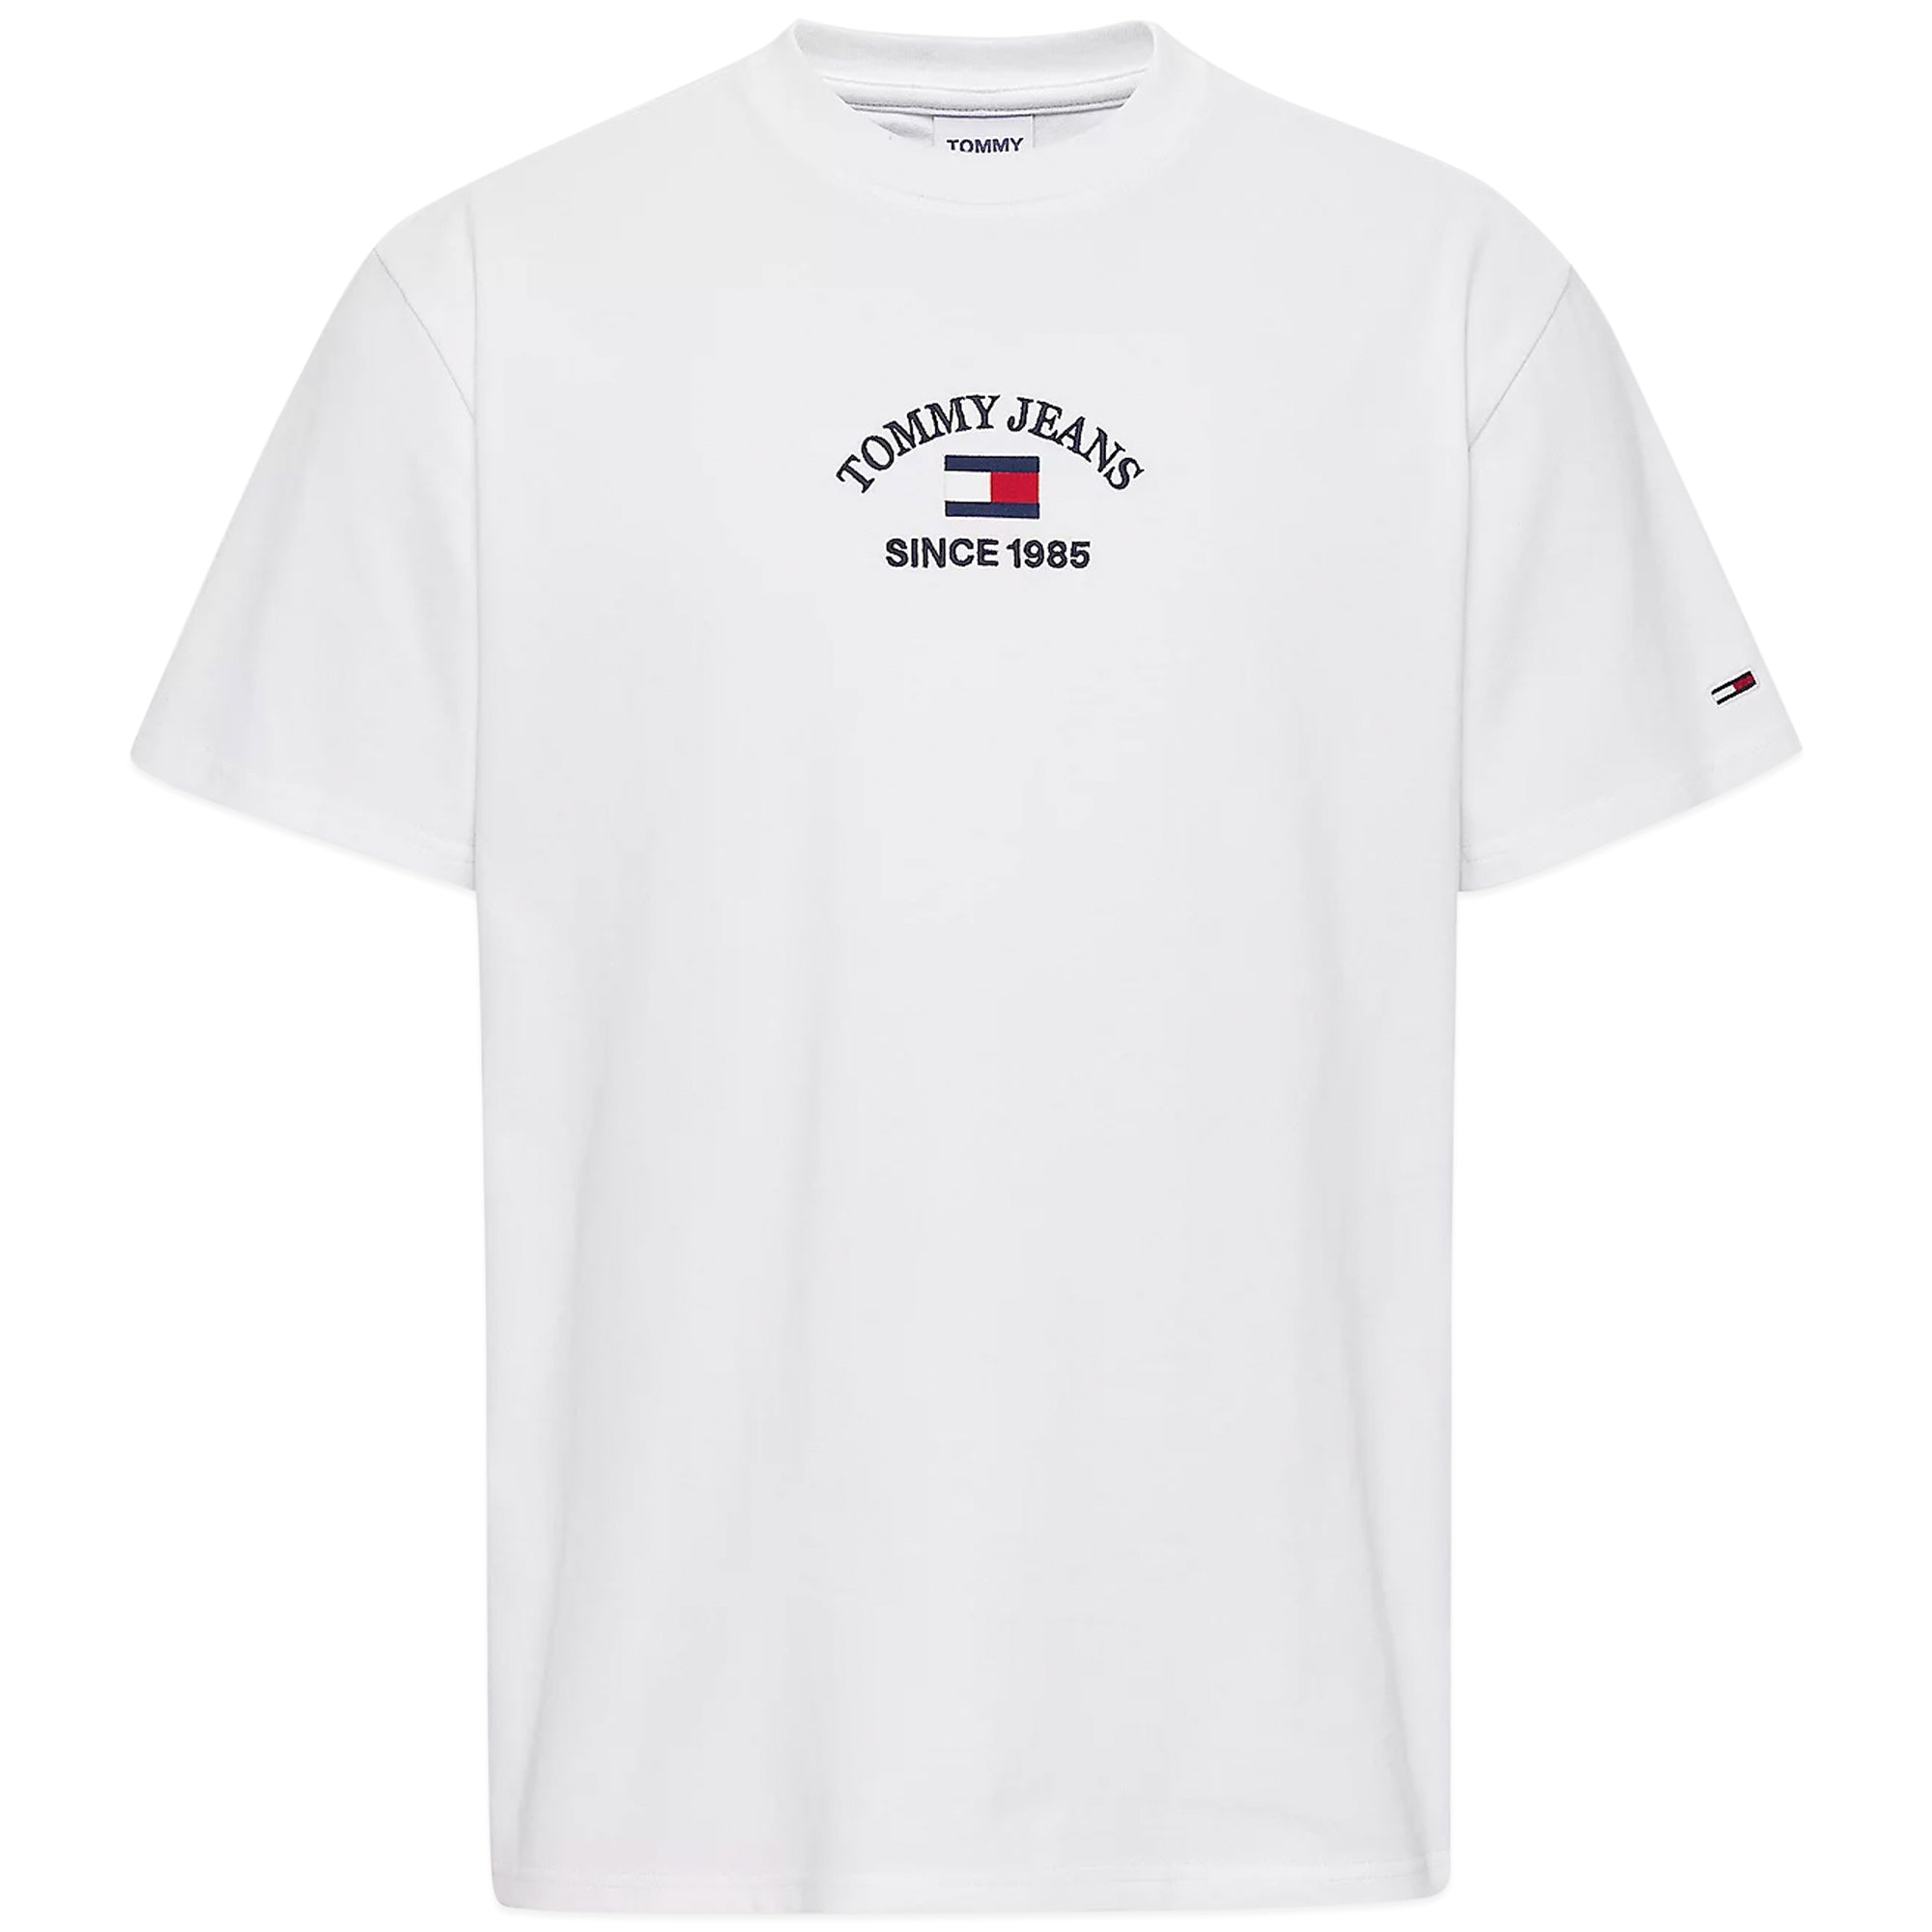 Tommy Jeans Hand Written Linear T-Shirt - White